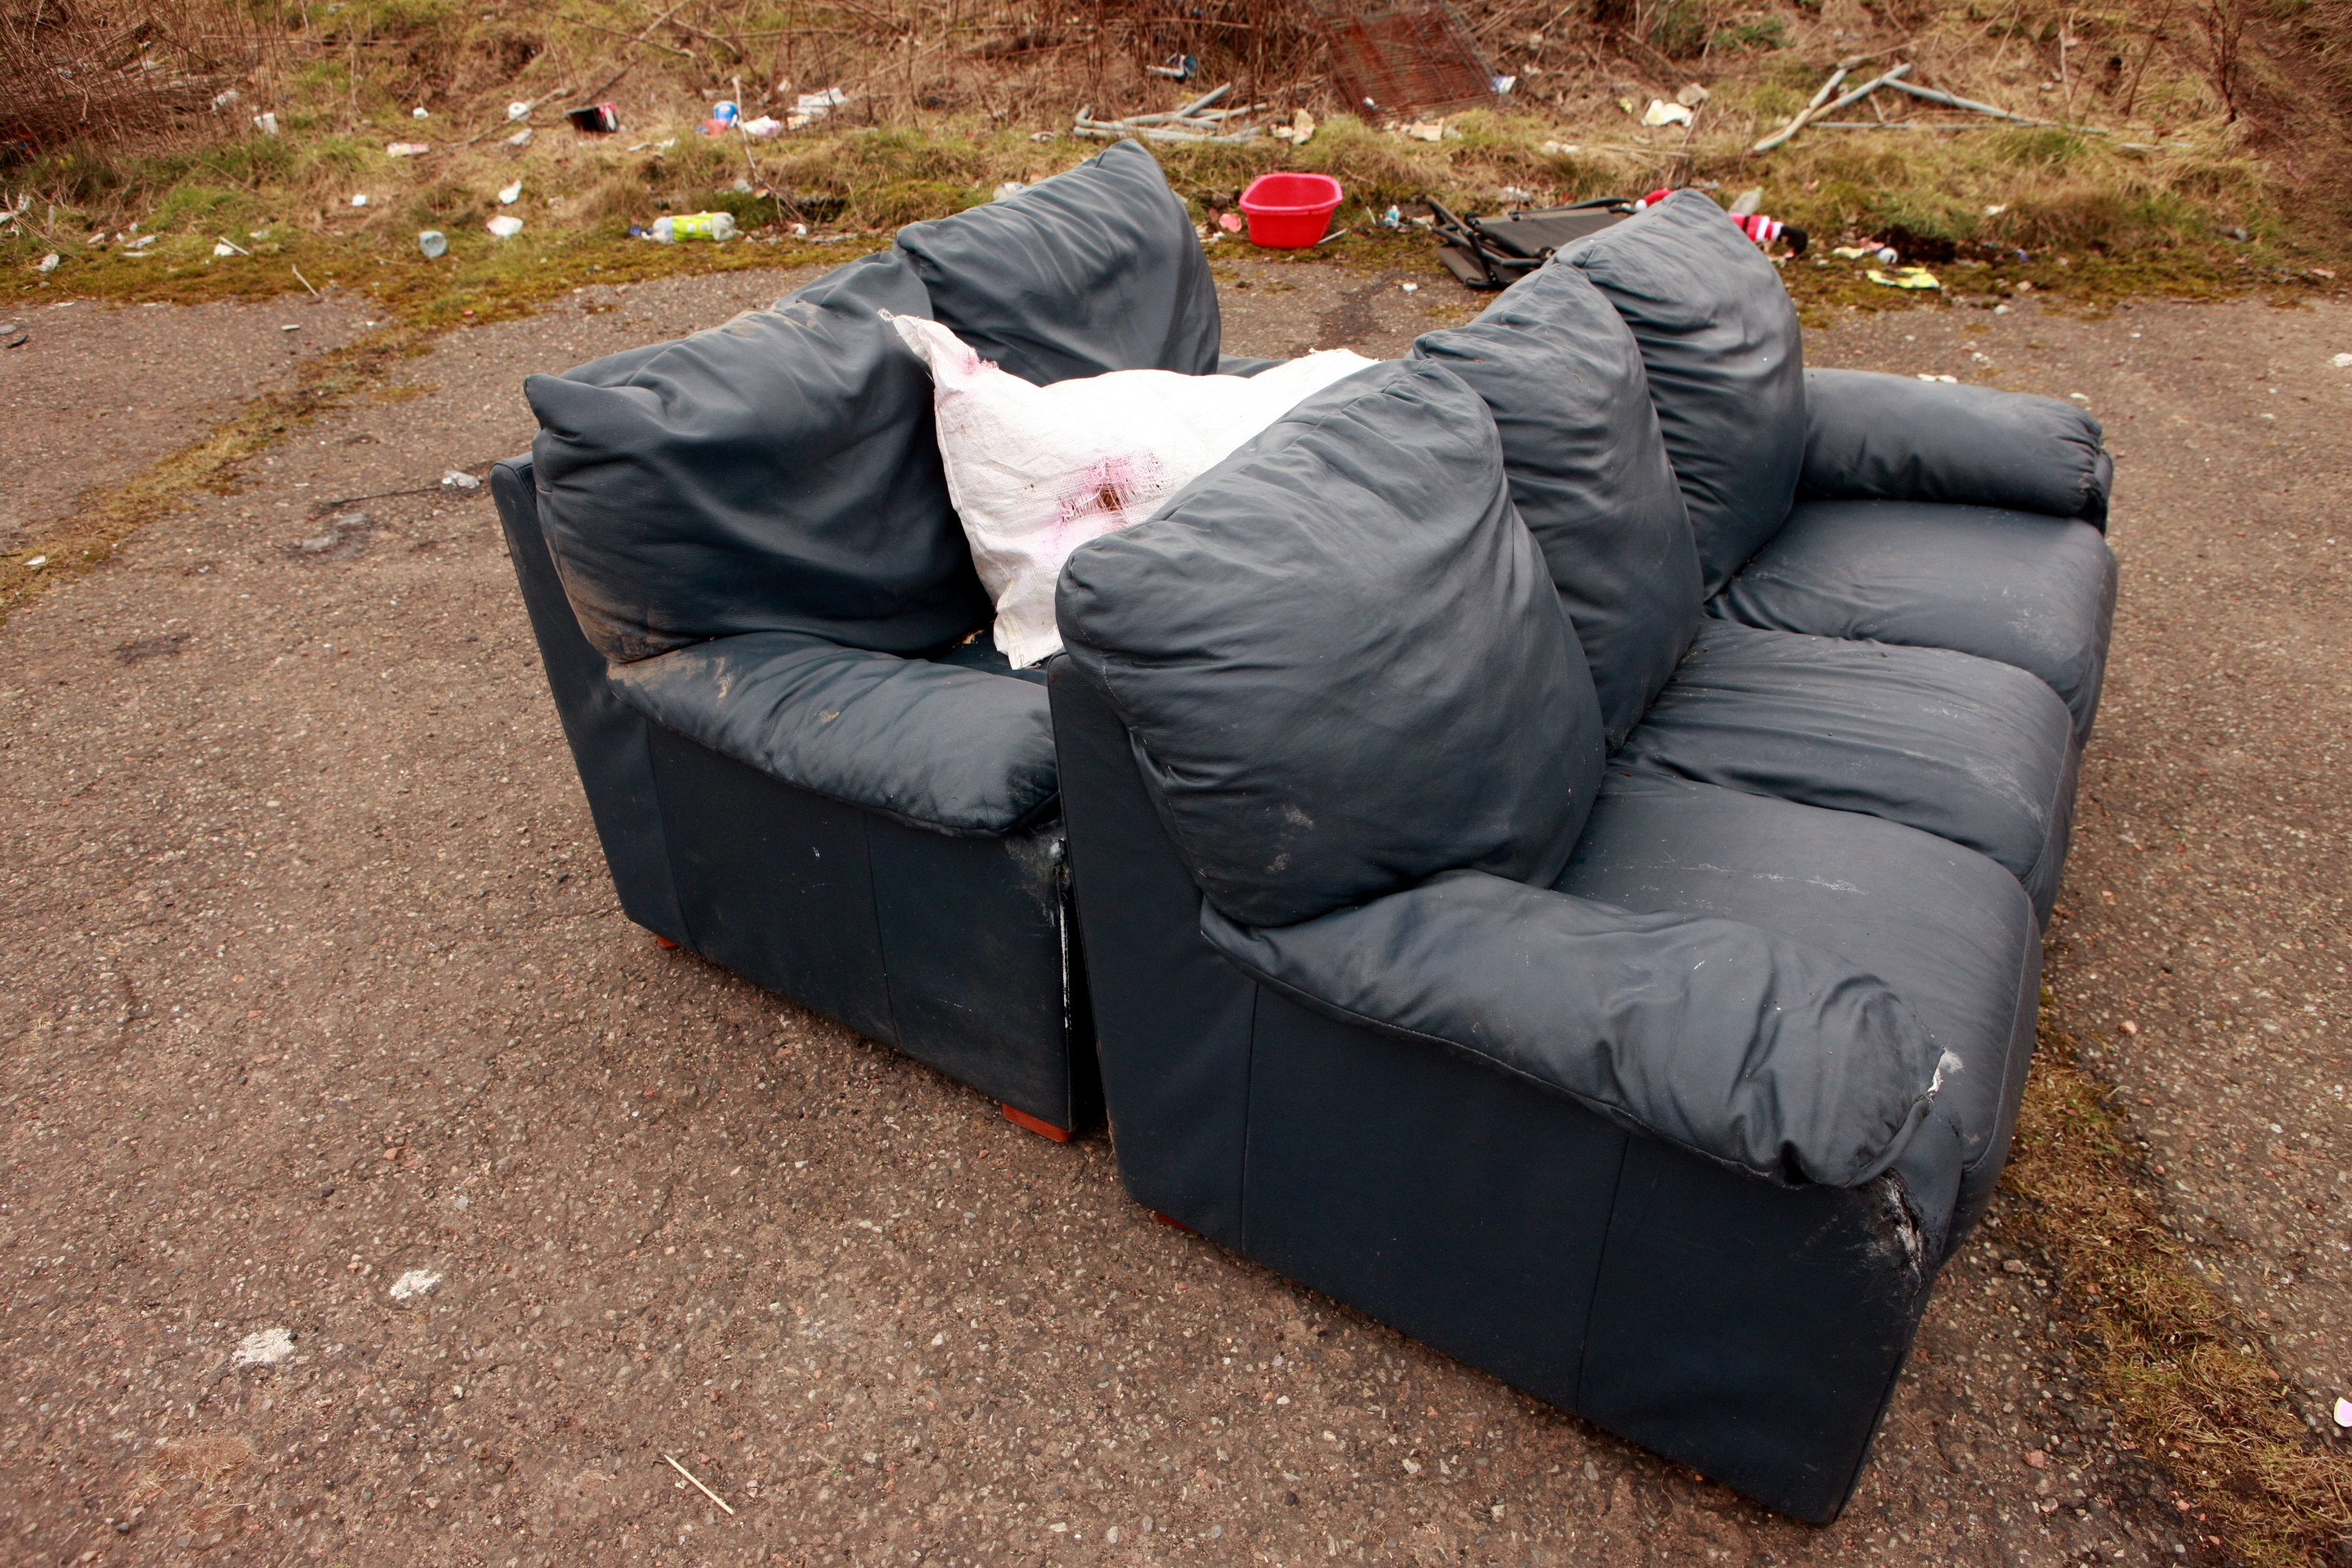 There are calls for a more high-tech approach to tracking fly-tipping hotspots.